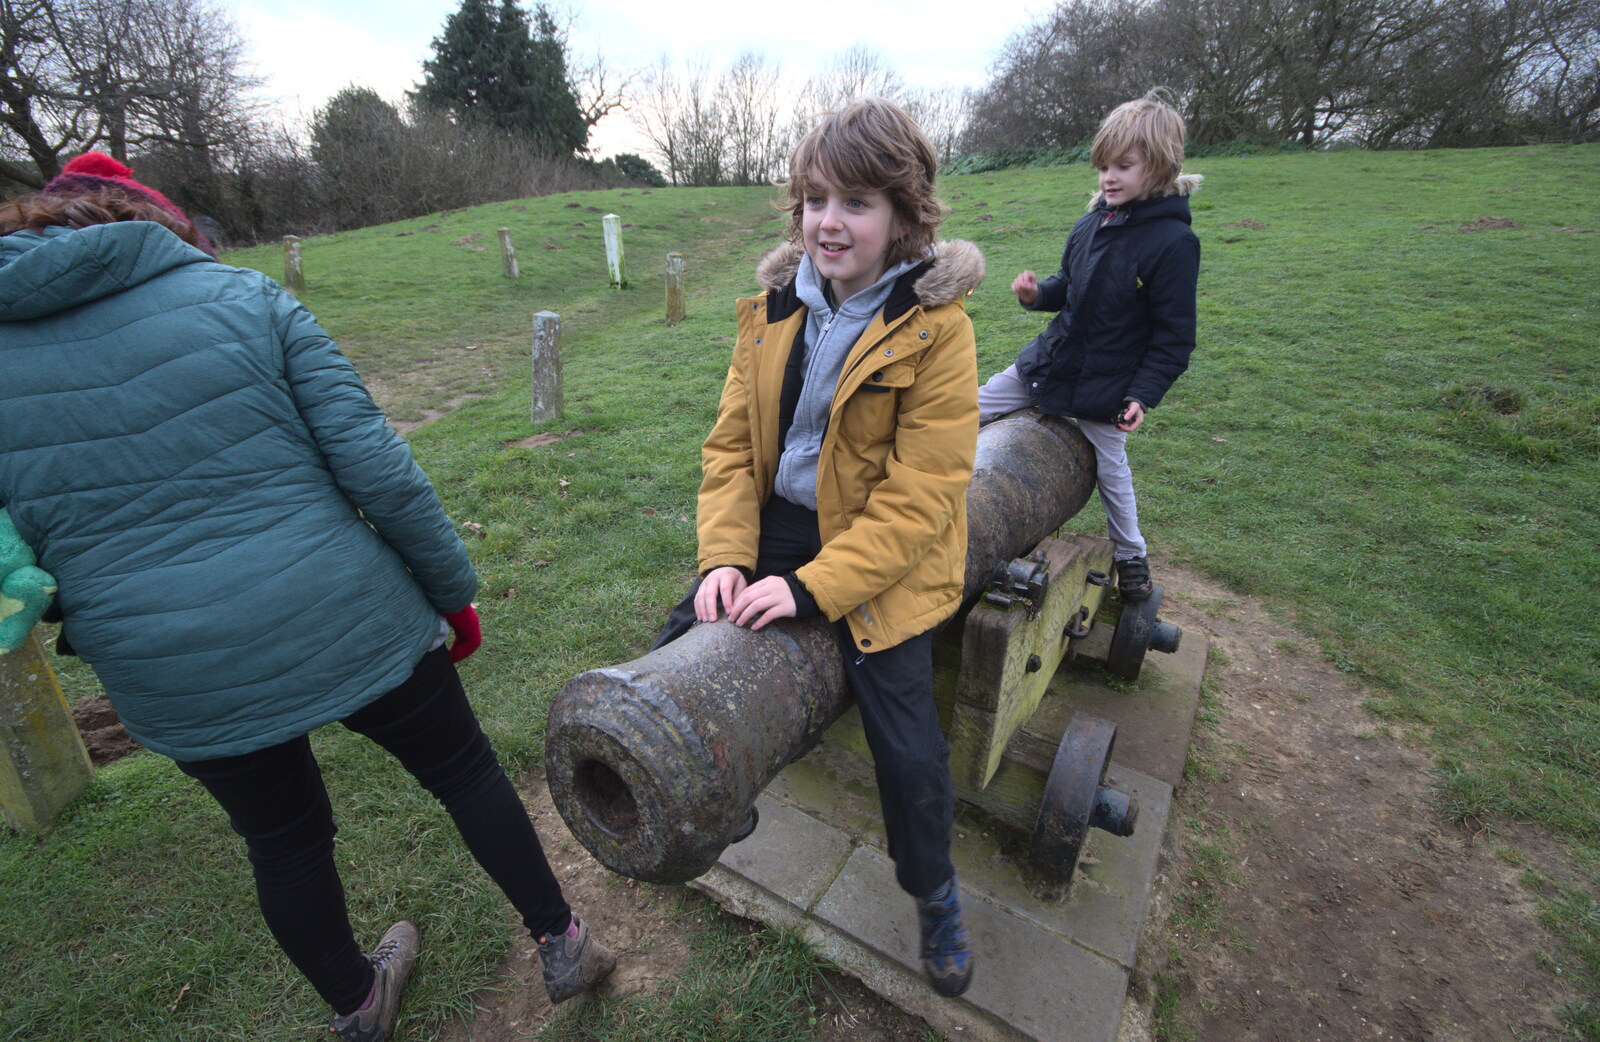 A Trip to Orford, Suffolk - 25th January 2020: The boys mess around on a cannon